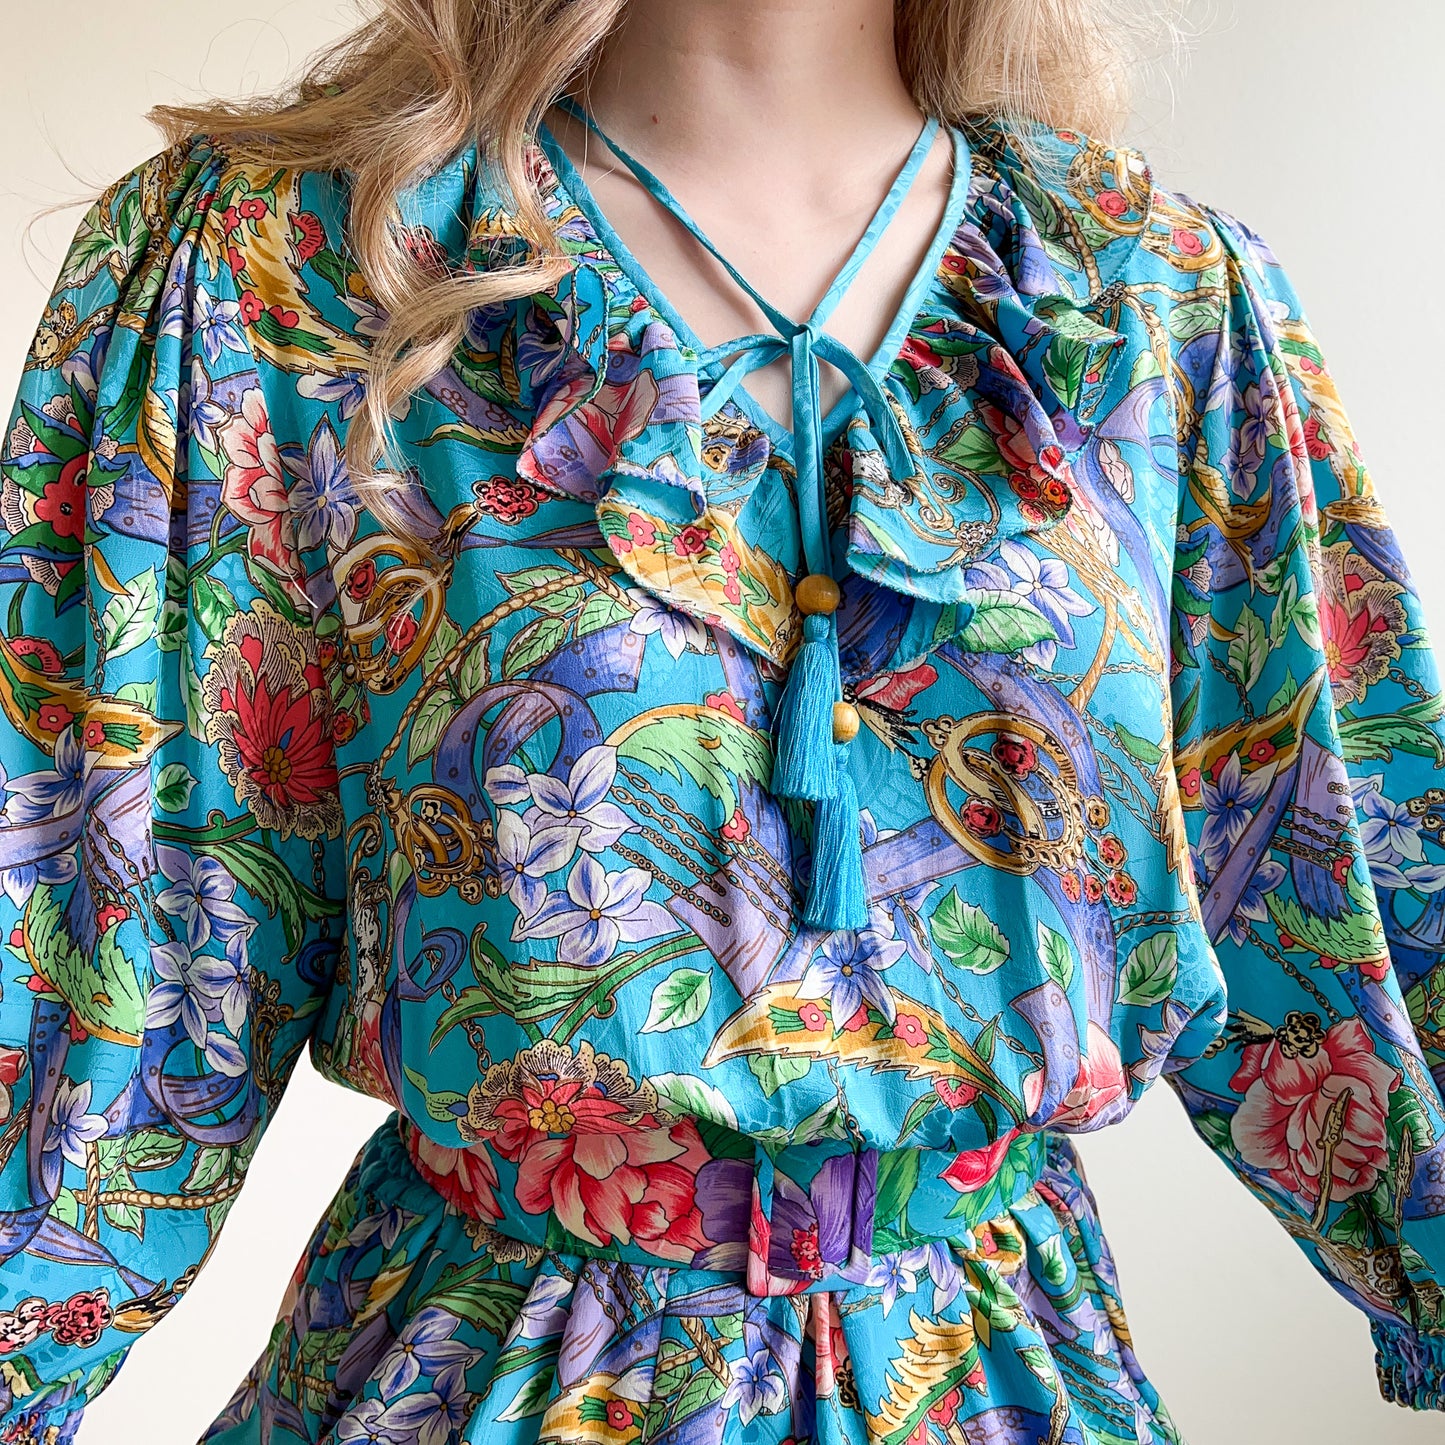 1980s Diane Freis Floral Print Dress With Ruffled Collar (S/M)